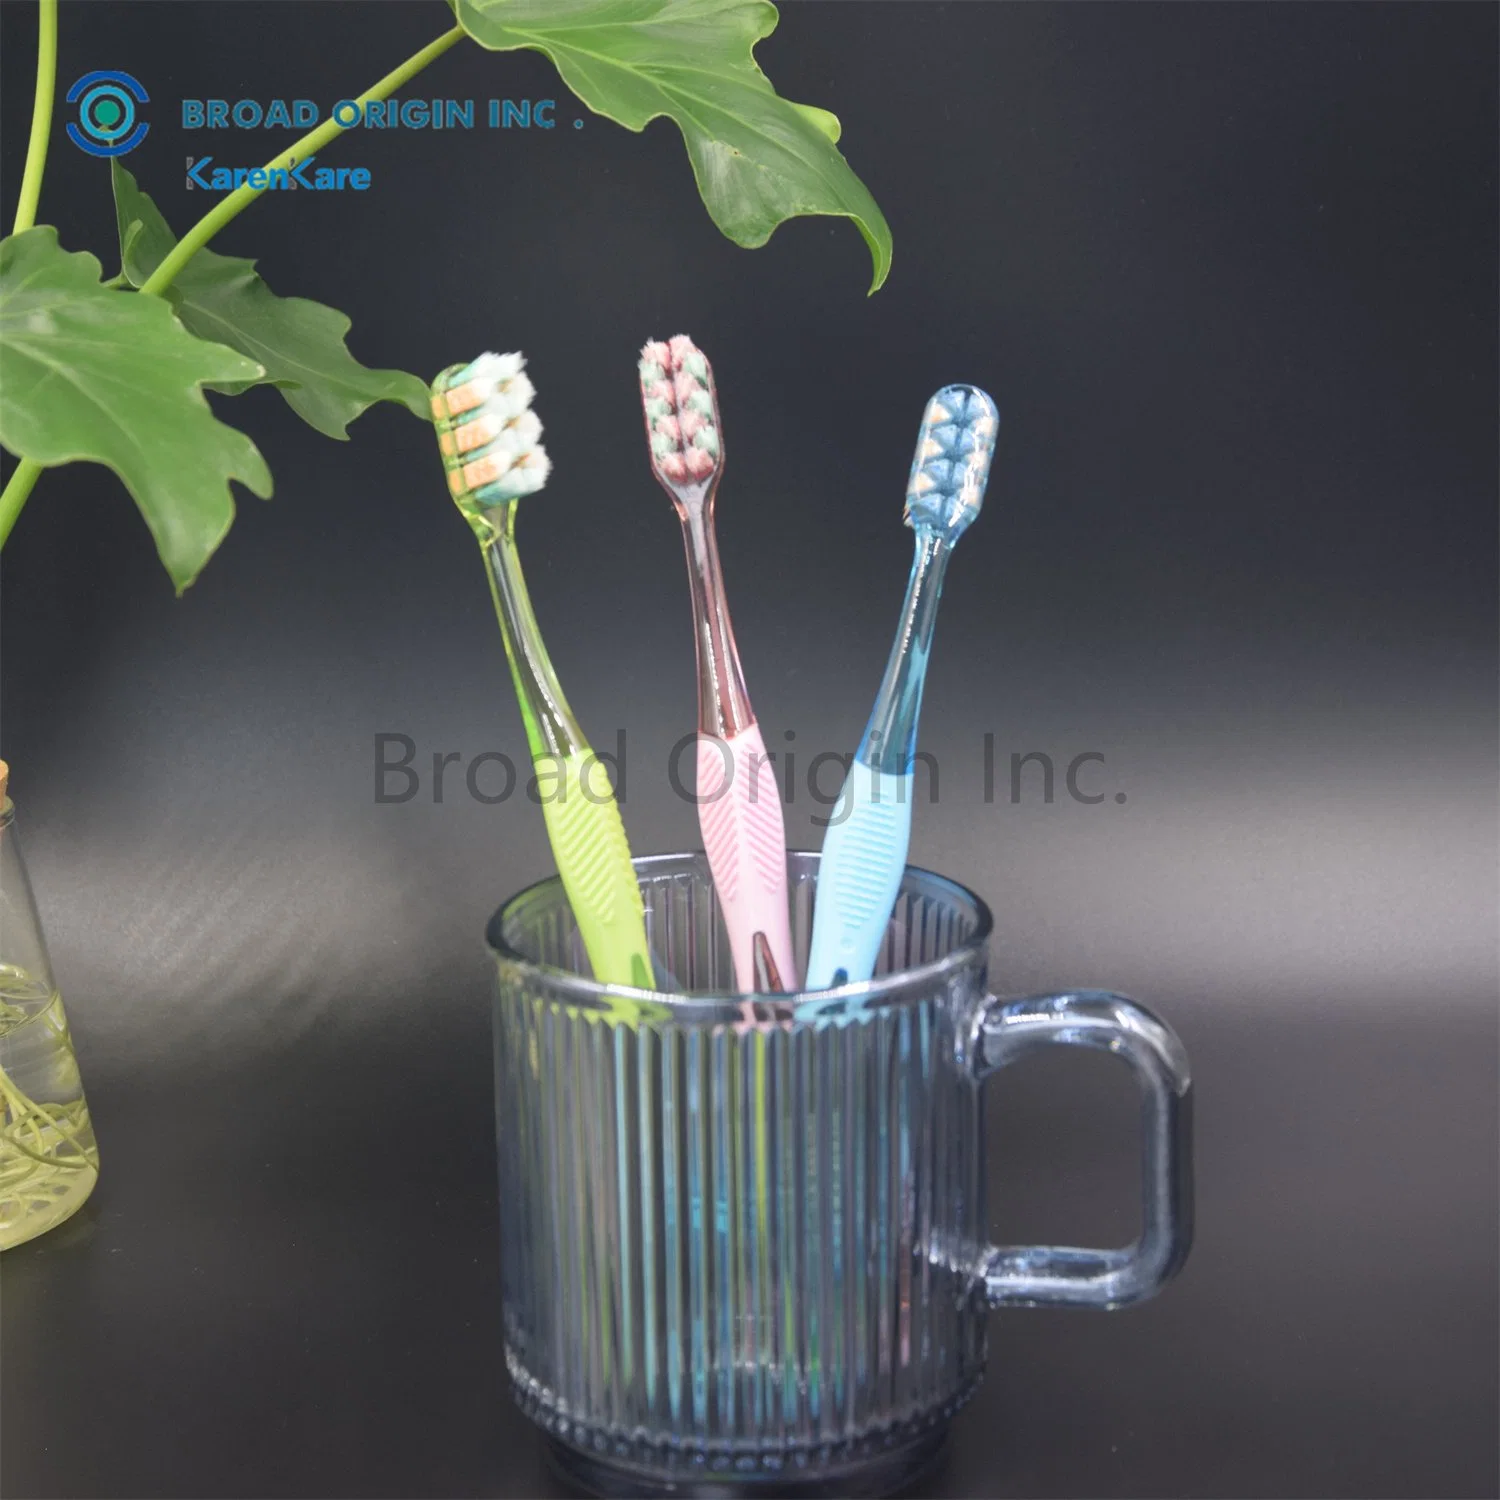 New Design Excellent Quality Oral Care Toothbrush Best Price Teeth Whitening Custom Logo Free Samples Adult Toothbrush